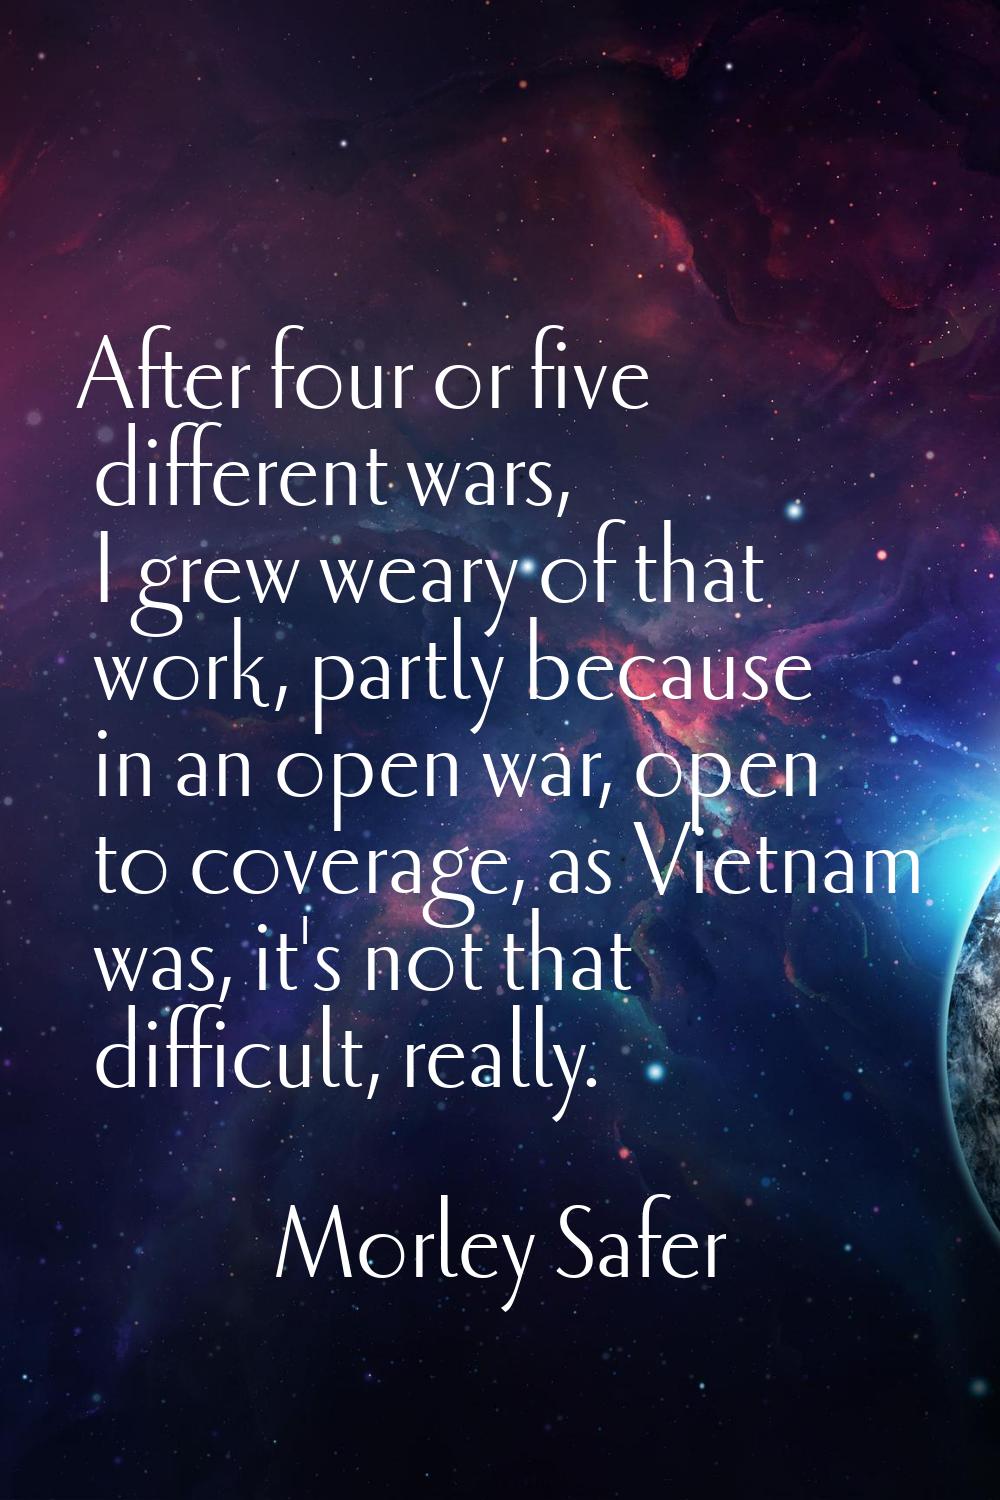 After four or five different wars, I grew weary of that work, partly because in an open war, open t